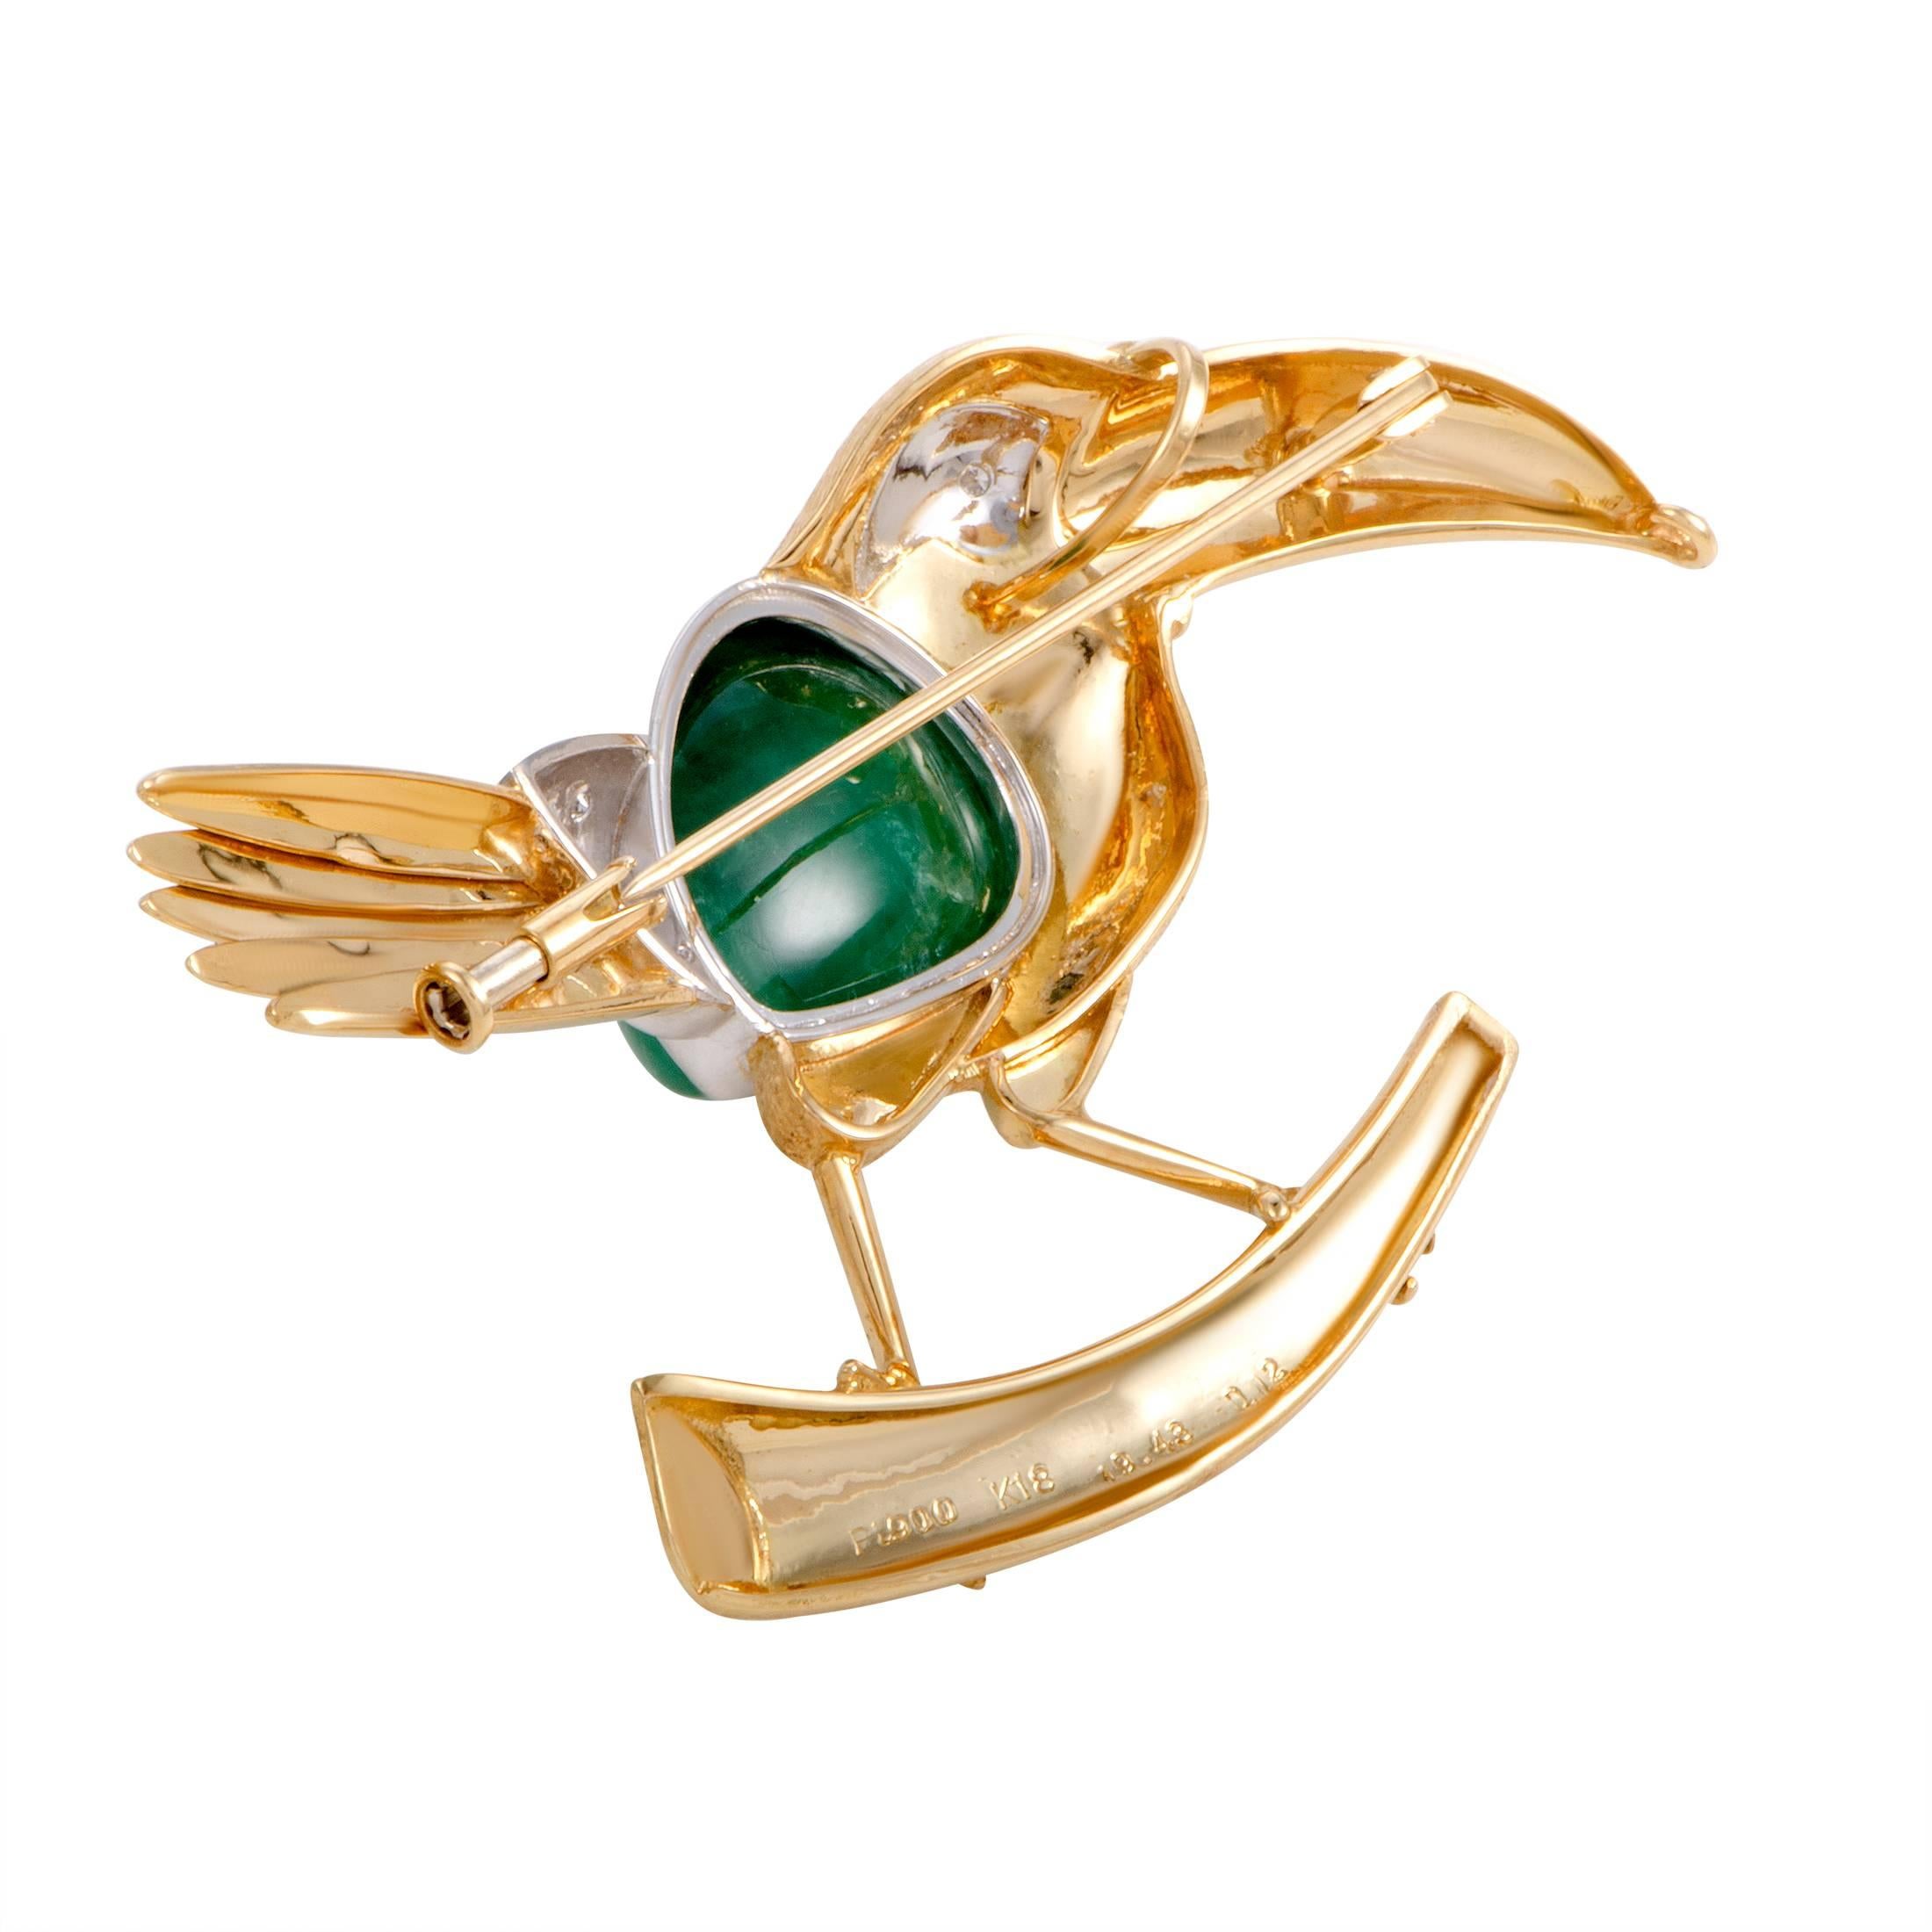 Depicting a bird in an exceptionally luxurious manner, this eye-catching brooch offers an incredibly offbeat, fashionable appearance. The brooch is made of 18K yellow gold and platinum decorated with 0.12 carats of diamonds and a captivating emerald